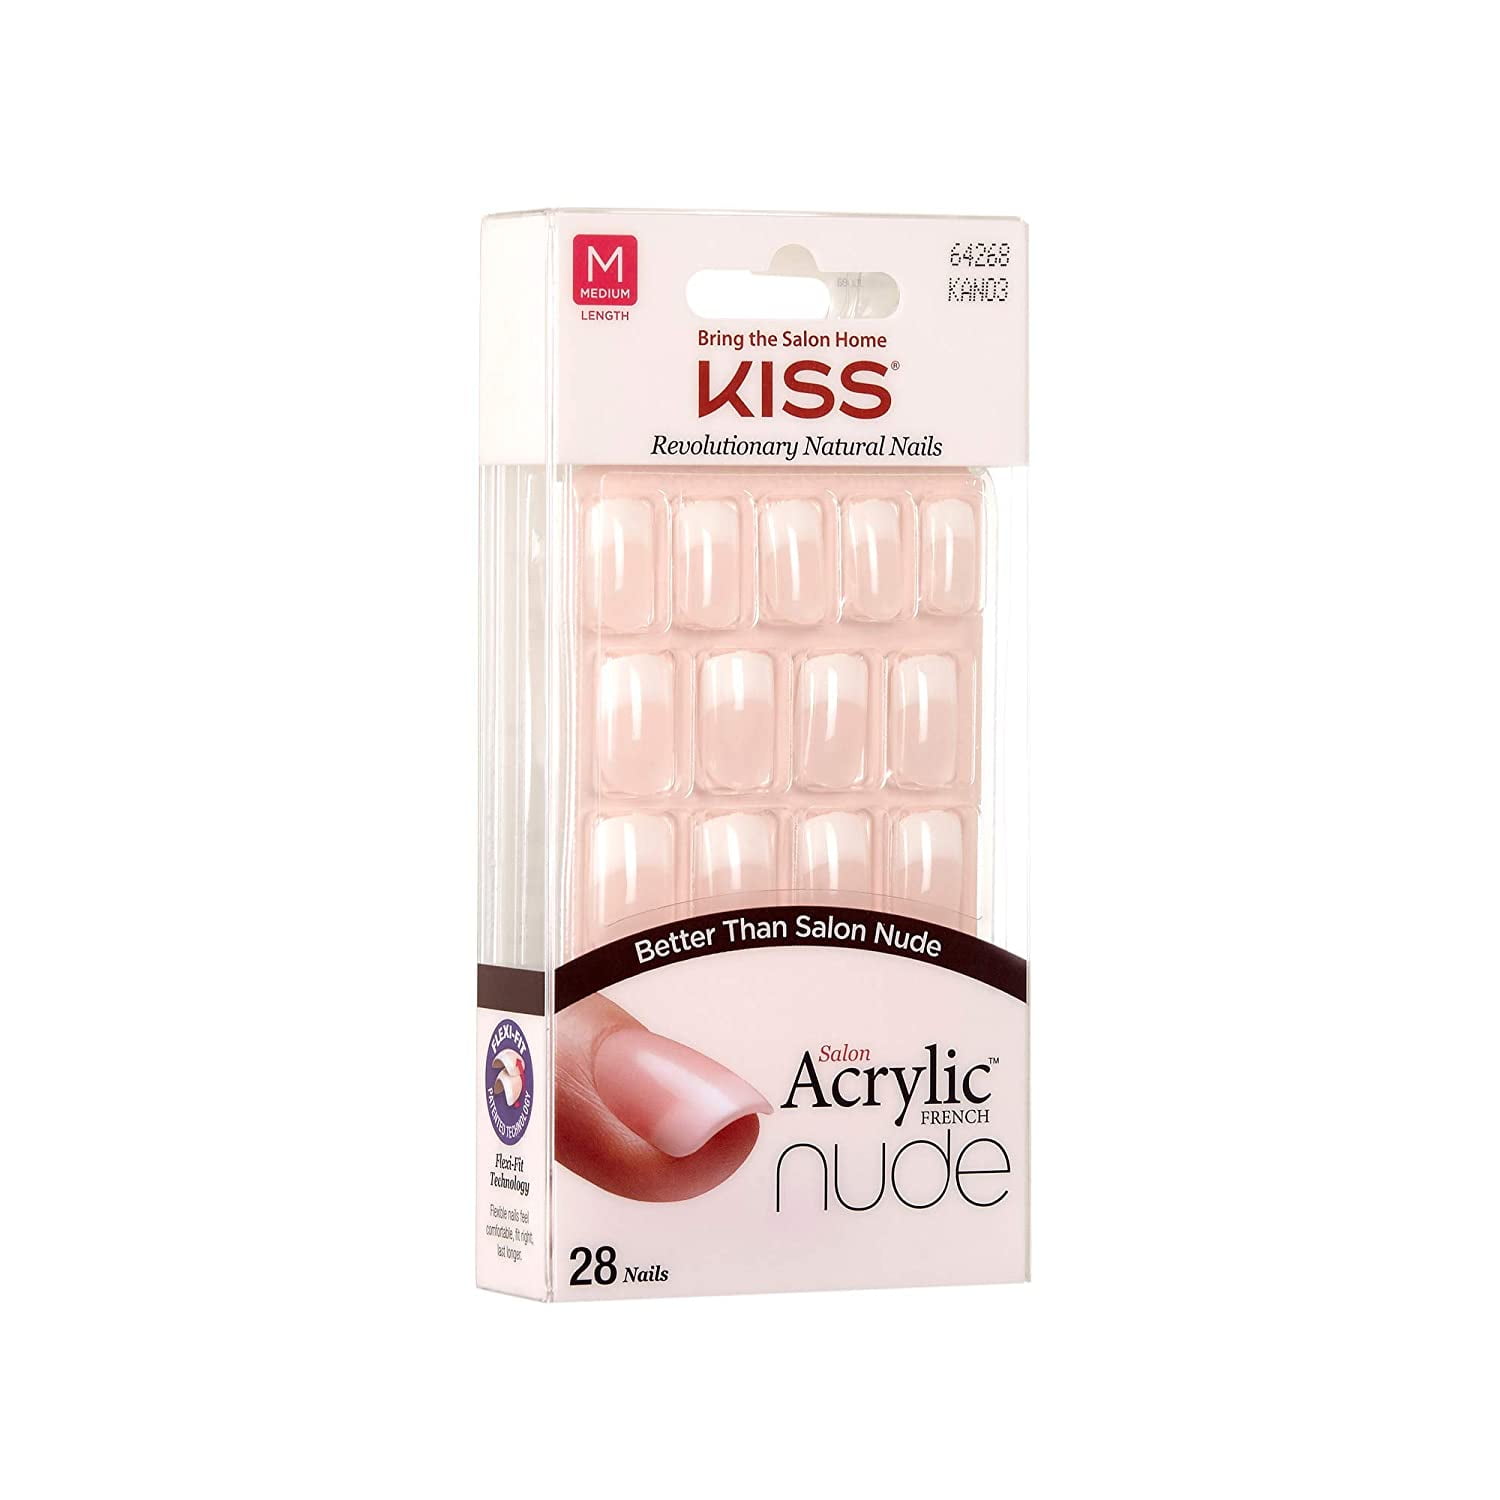 KISS Salon Acrylic French Nude Nails, 28 Count, 2 Pack - Walmart.com